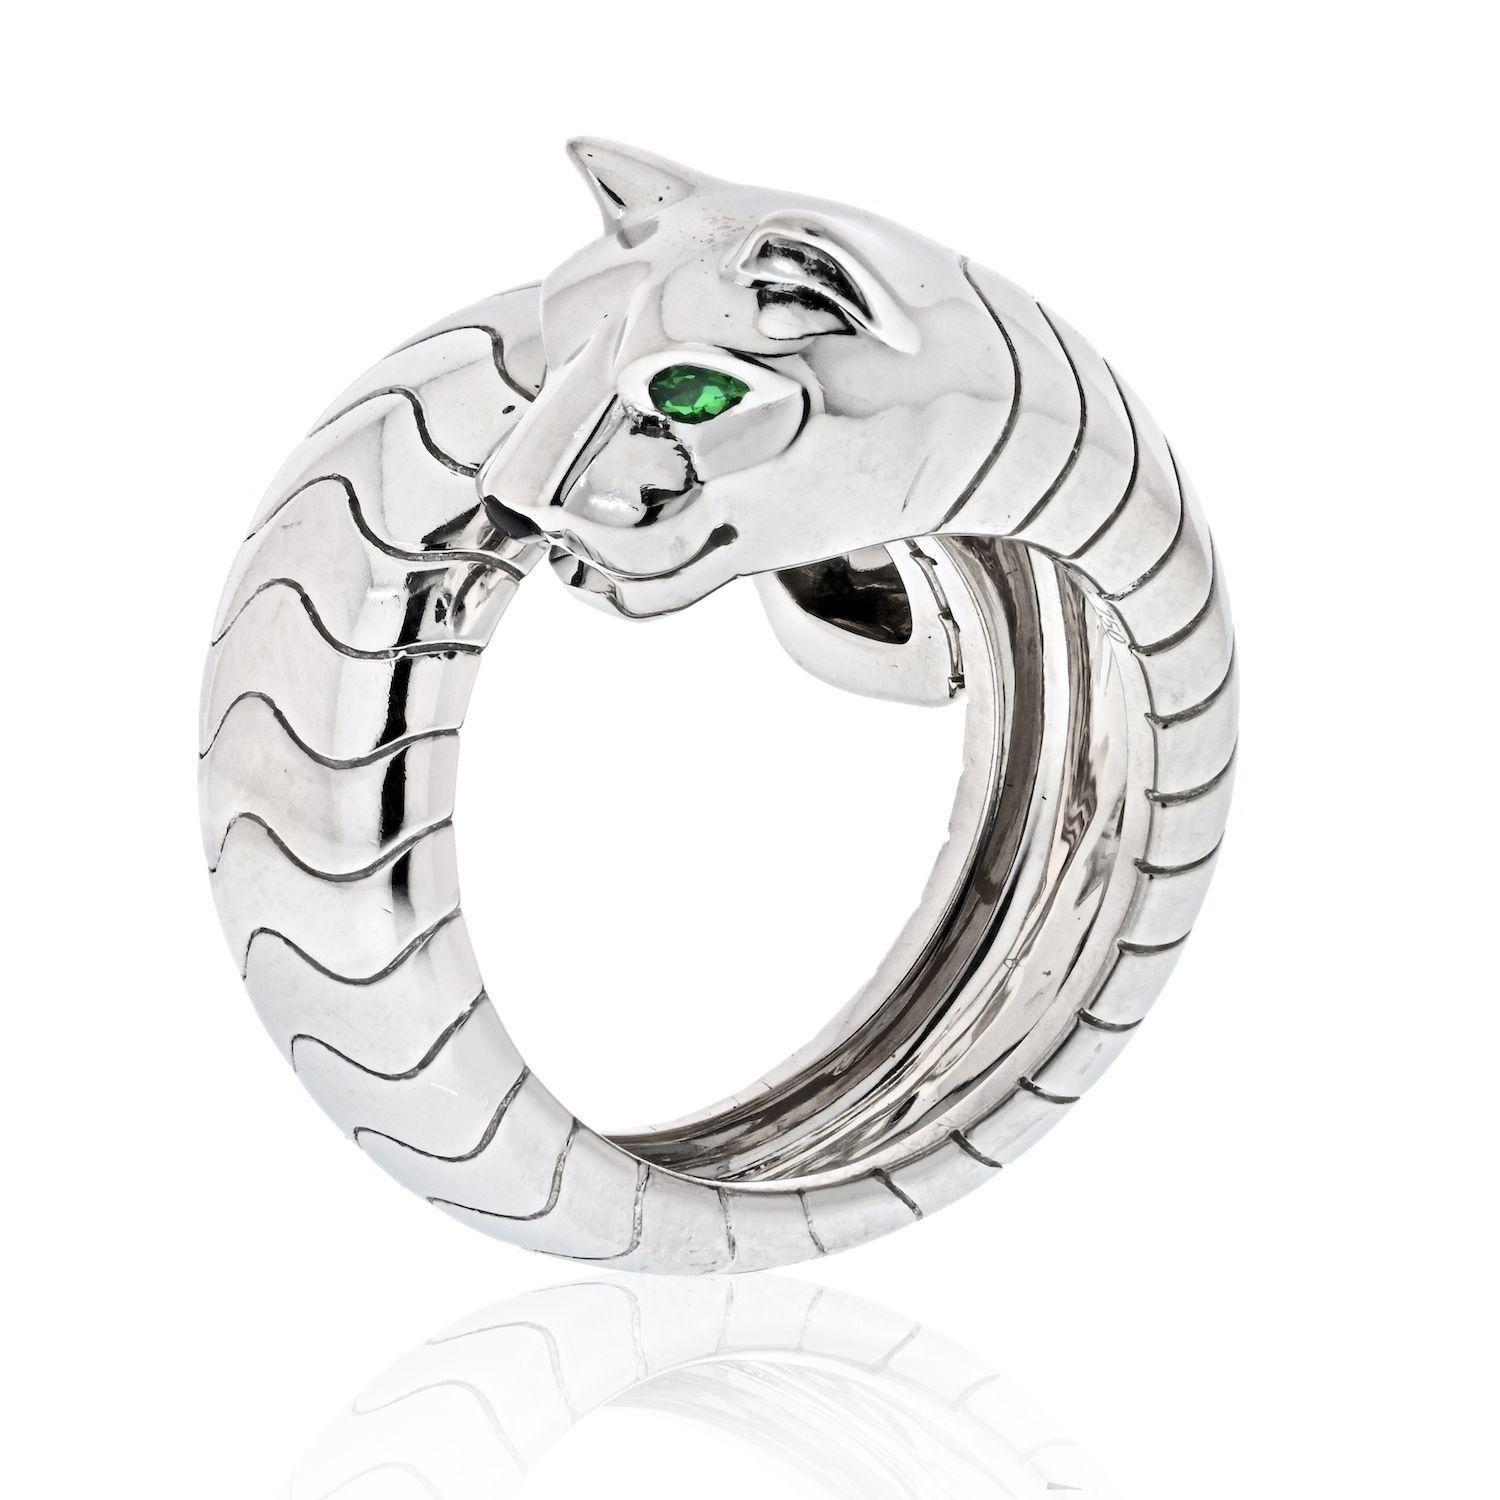 A stunning Cartier 18k white gold Lakarda Panthere ring from the Panthere de Cartier collection. The wrap around style ring comprises of a panther motif with emerald eyes, an onyx nose. The ring measures 8.33mm wide, is a size 52 and has a gross